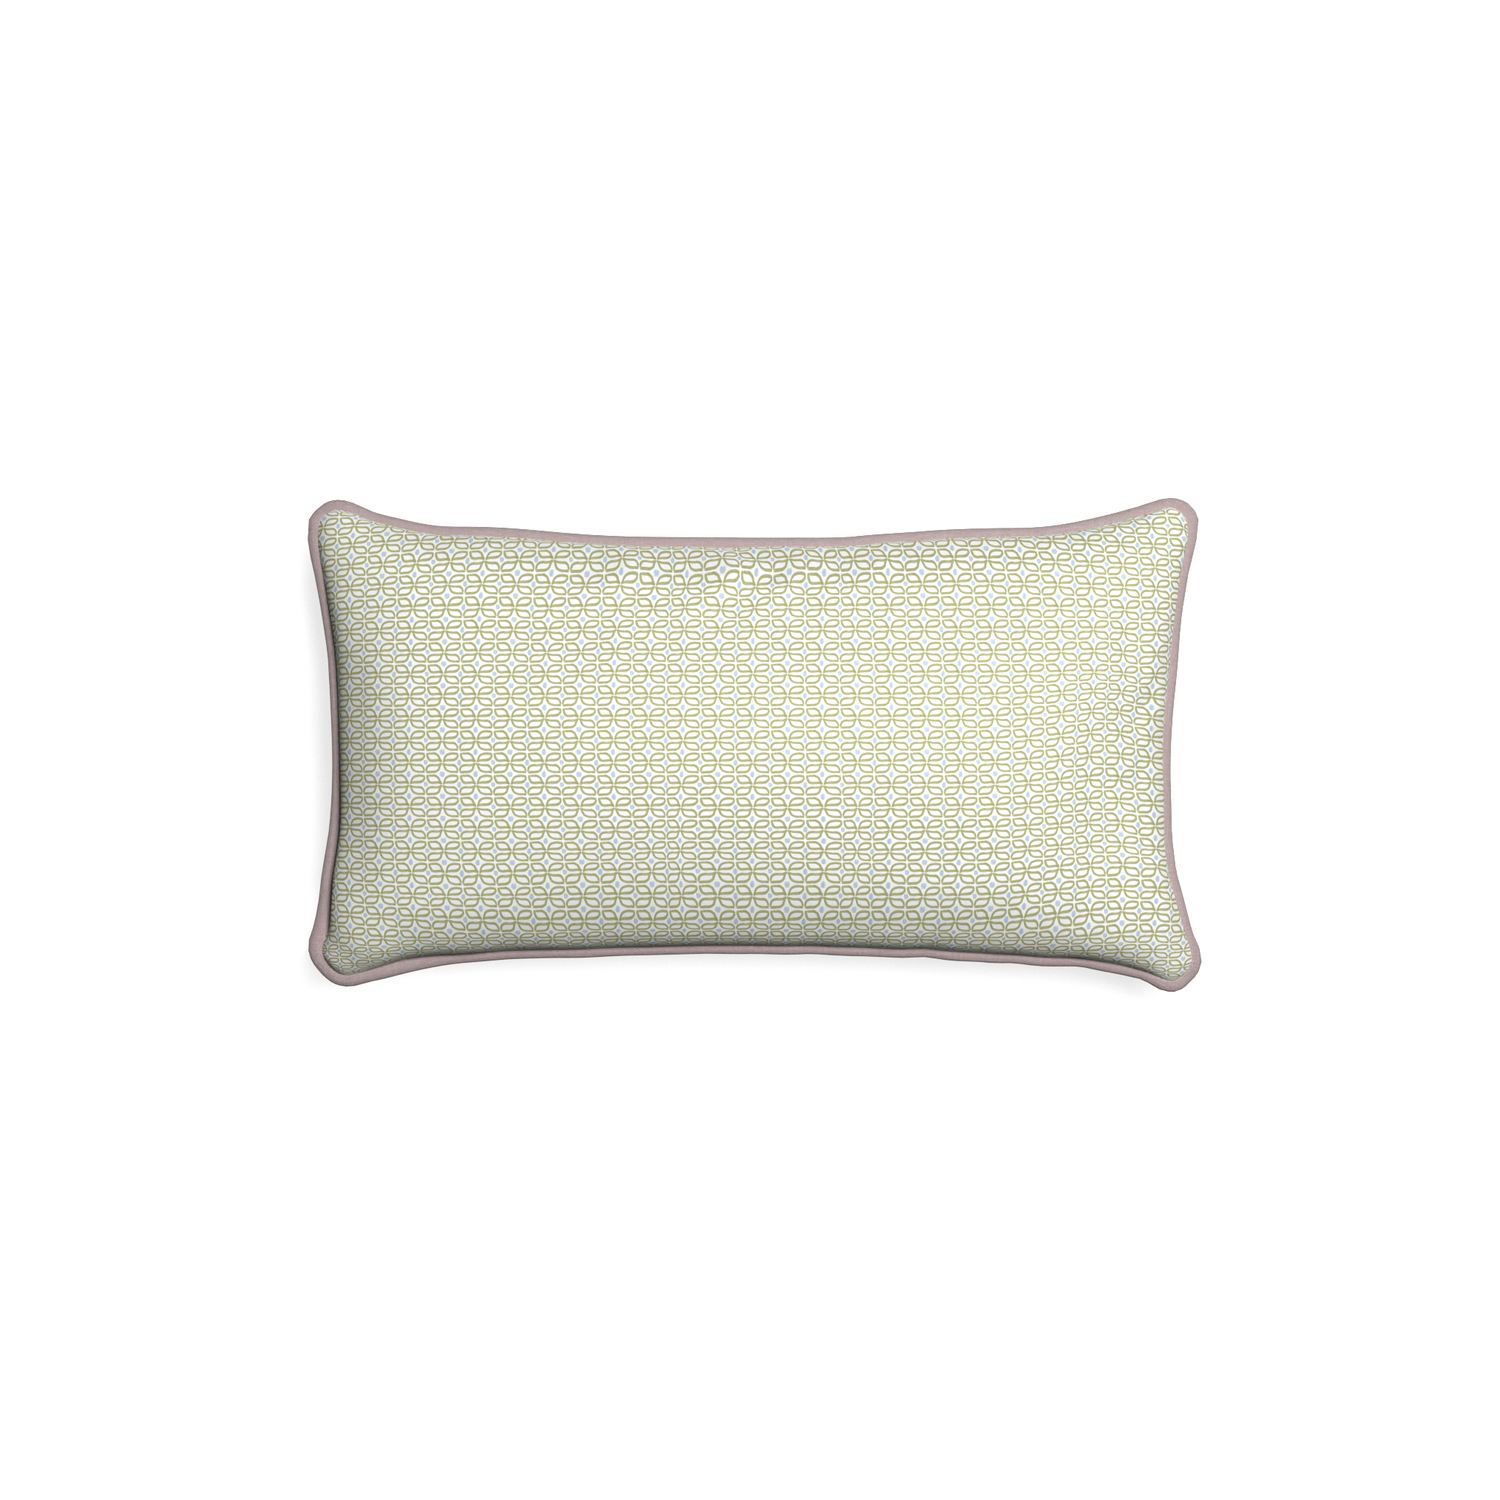 Petite-lumbar loomi moss custom moss green geometricpillow with orchid piping on white background